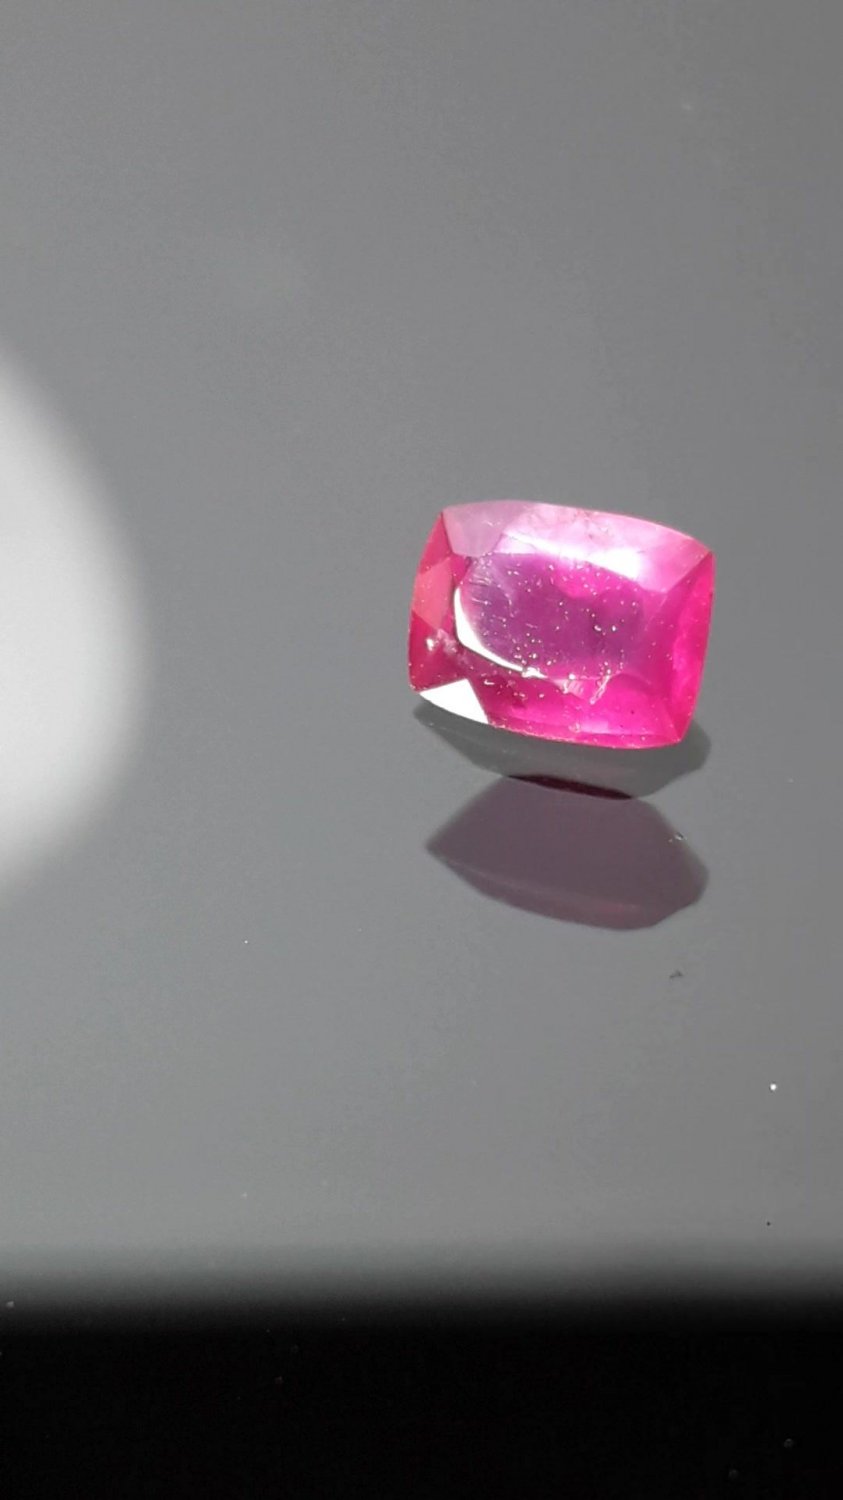 0.71 ct GIA Blood Red Ruby, untreated, loose, GGTL/GIA premium handcrafted rectangular cut with lust